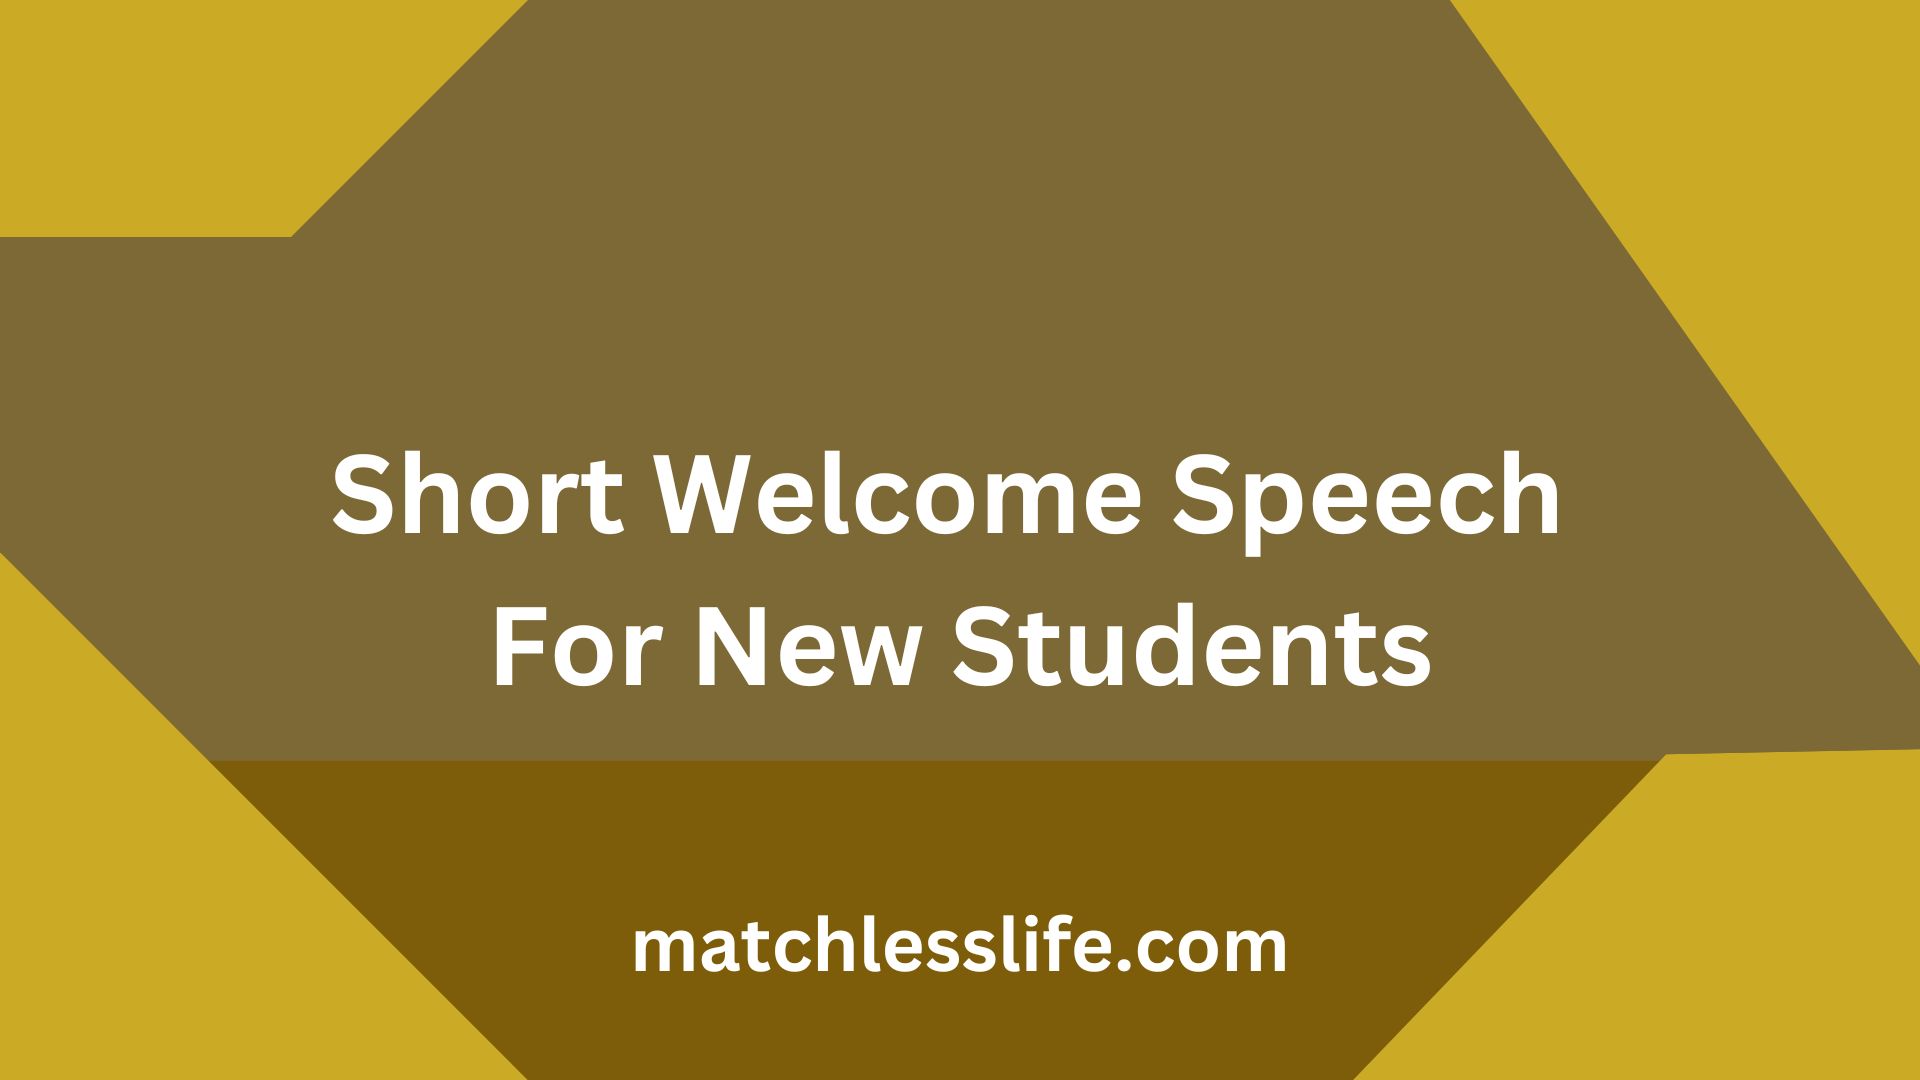 Short Welcome Speech For New Students